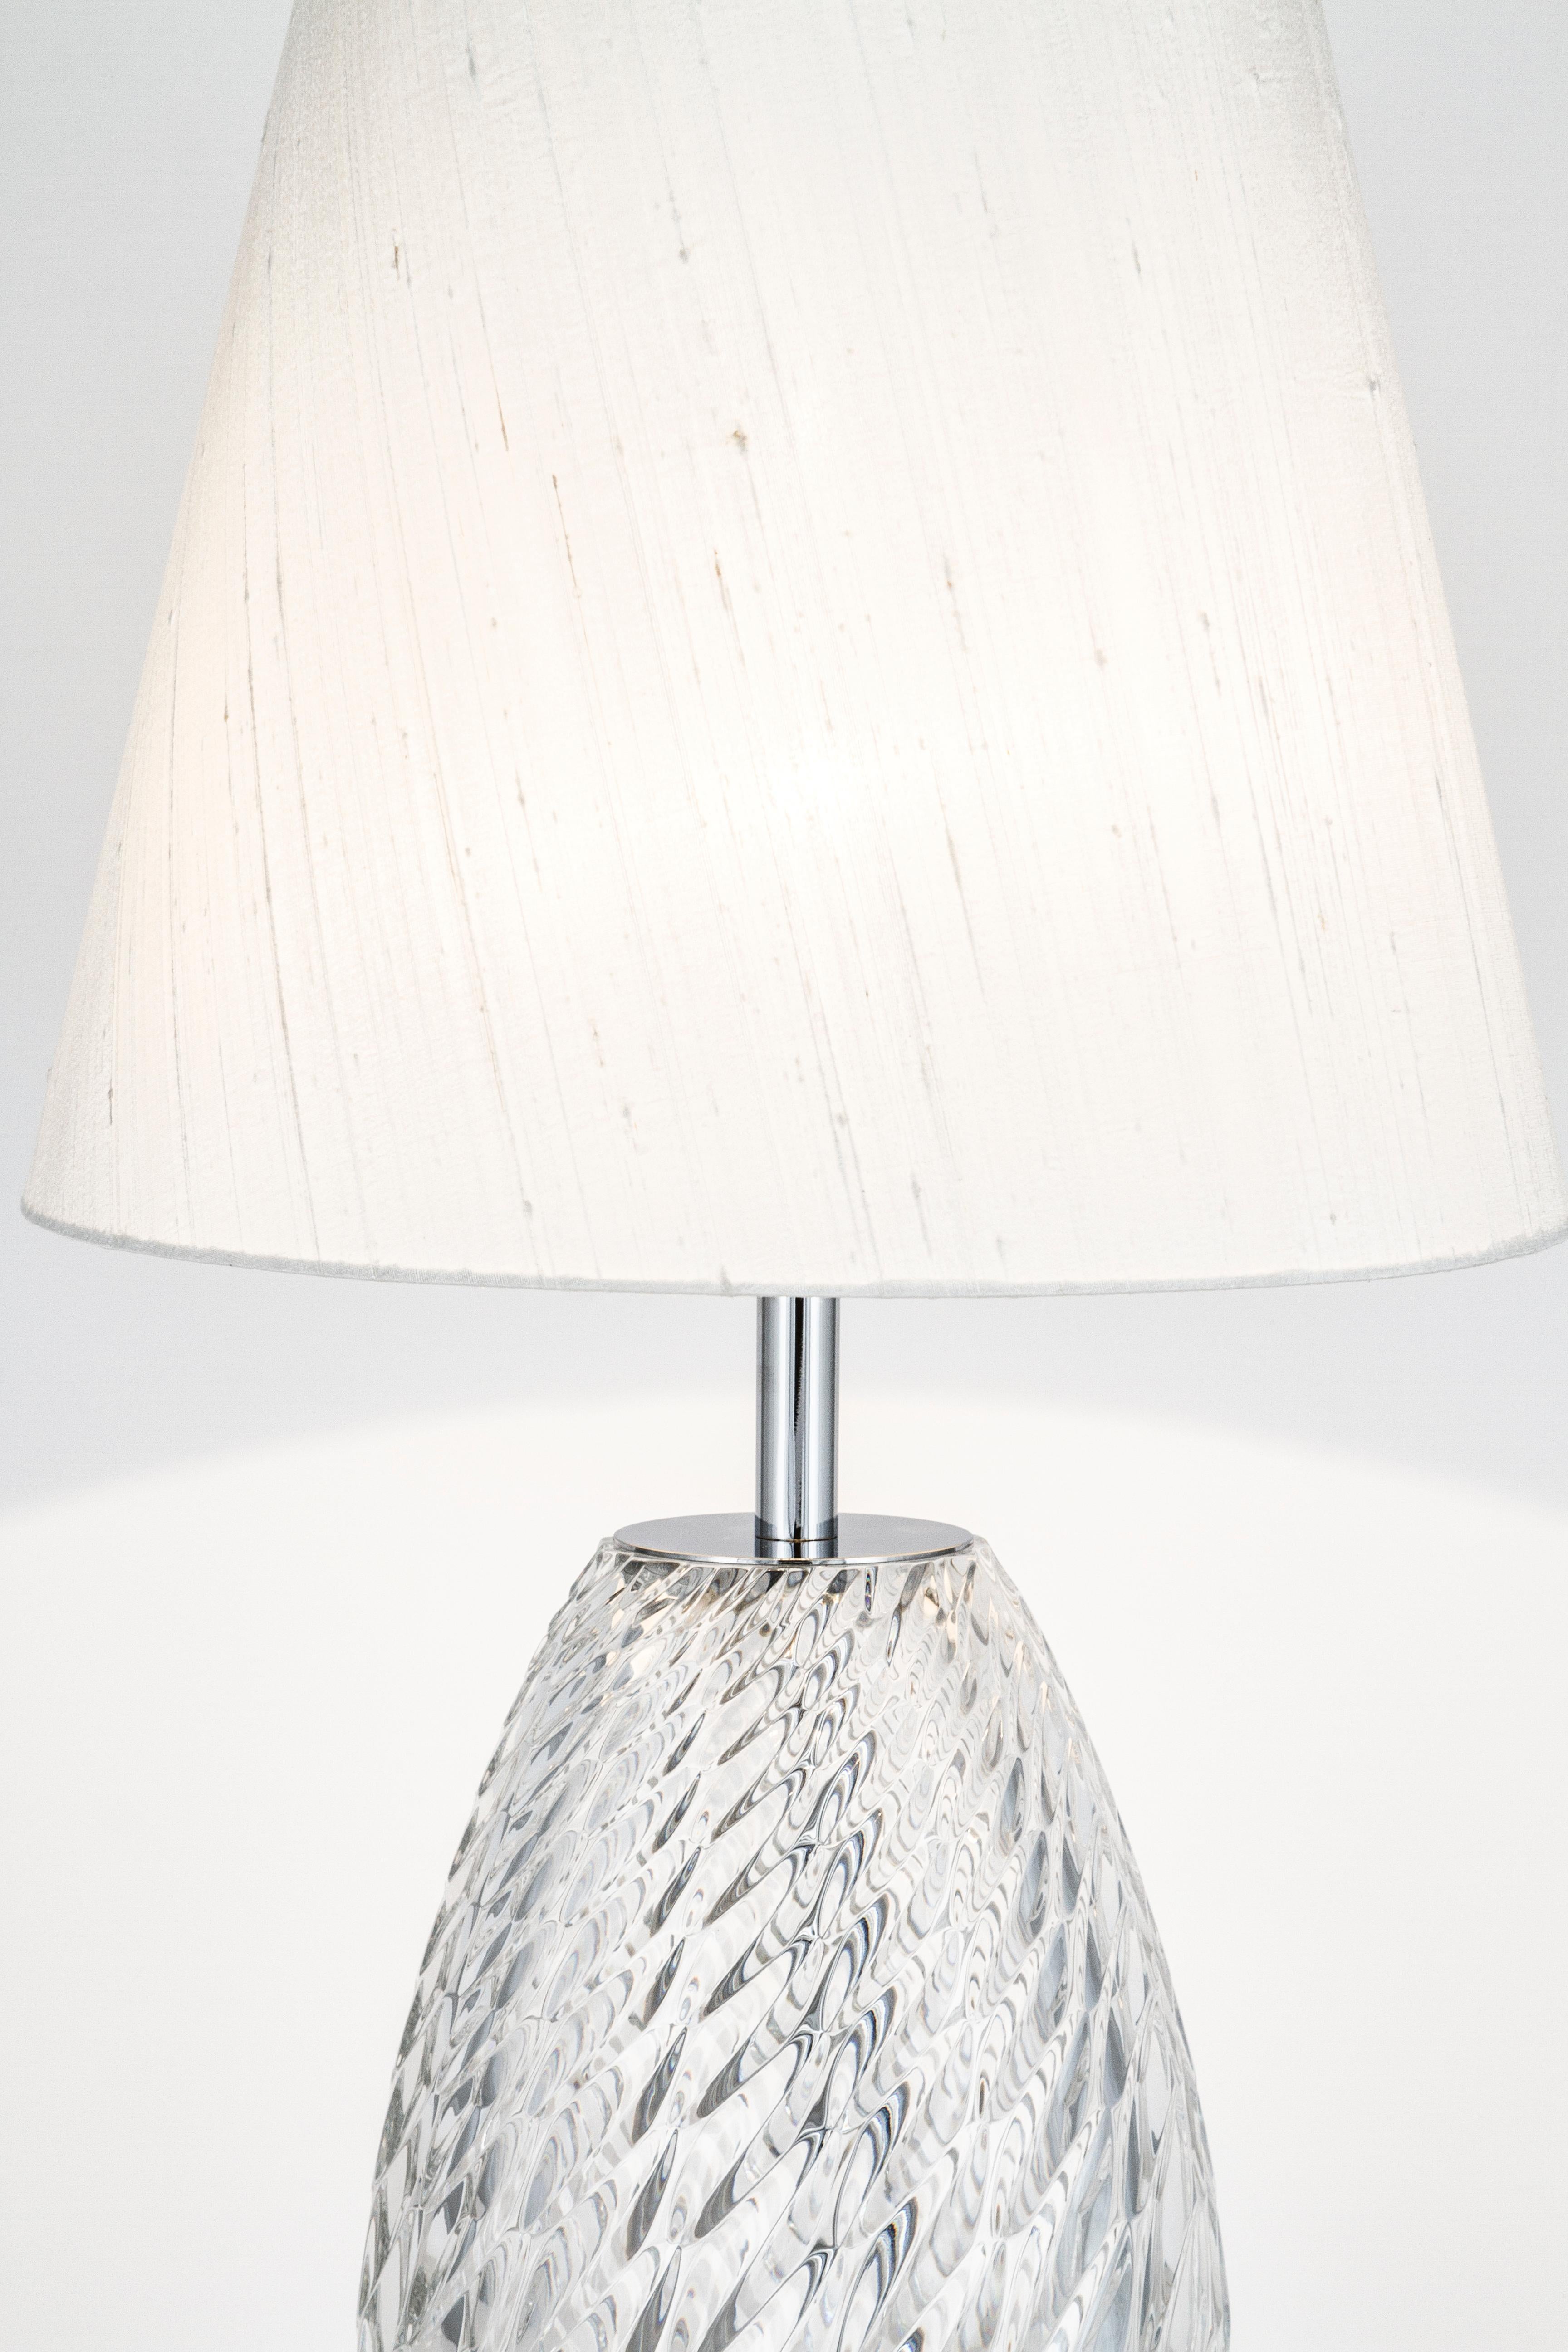 Set/2 Art Deco Vista Alegre Crystal Table Lamp Handmade Portugal by Greenapple In New Condition For Sale In Lisboa, PT